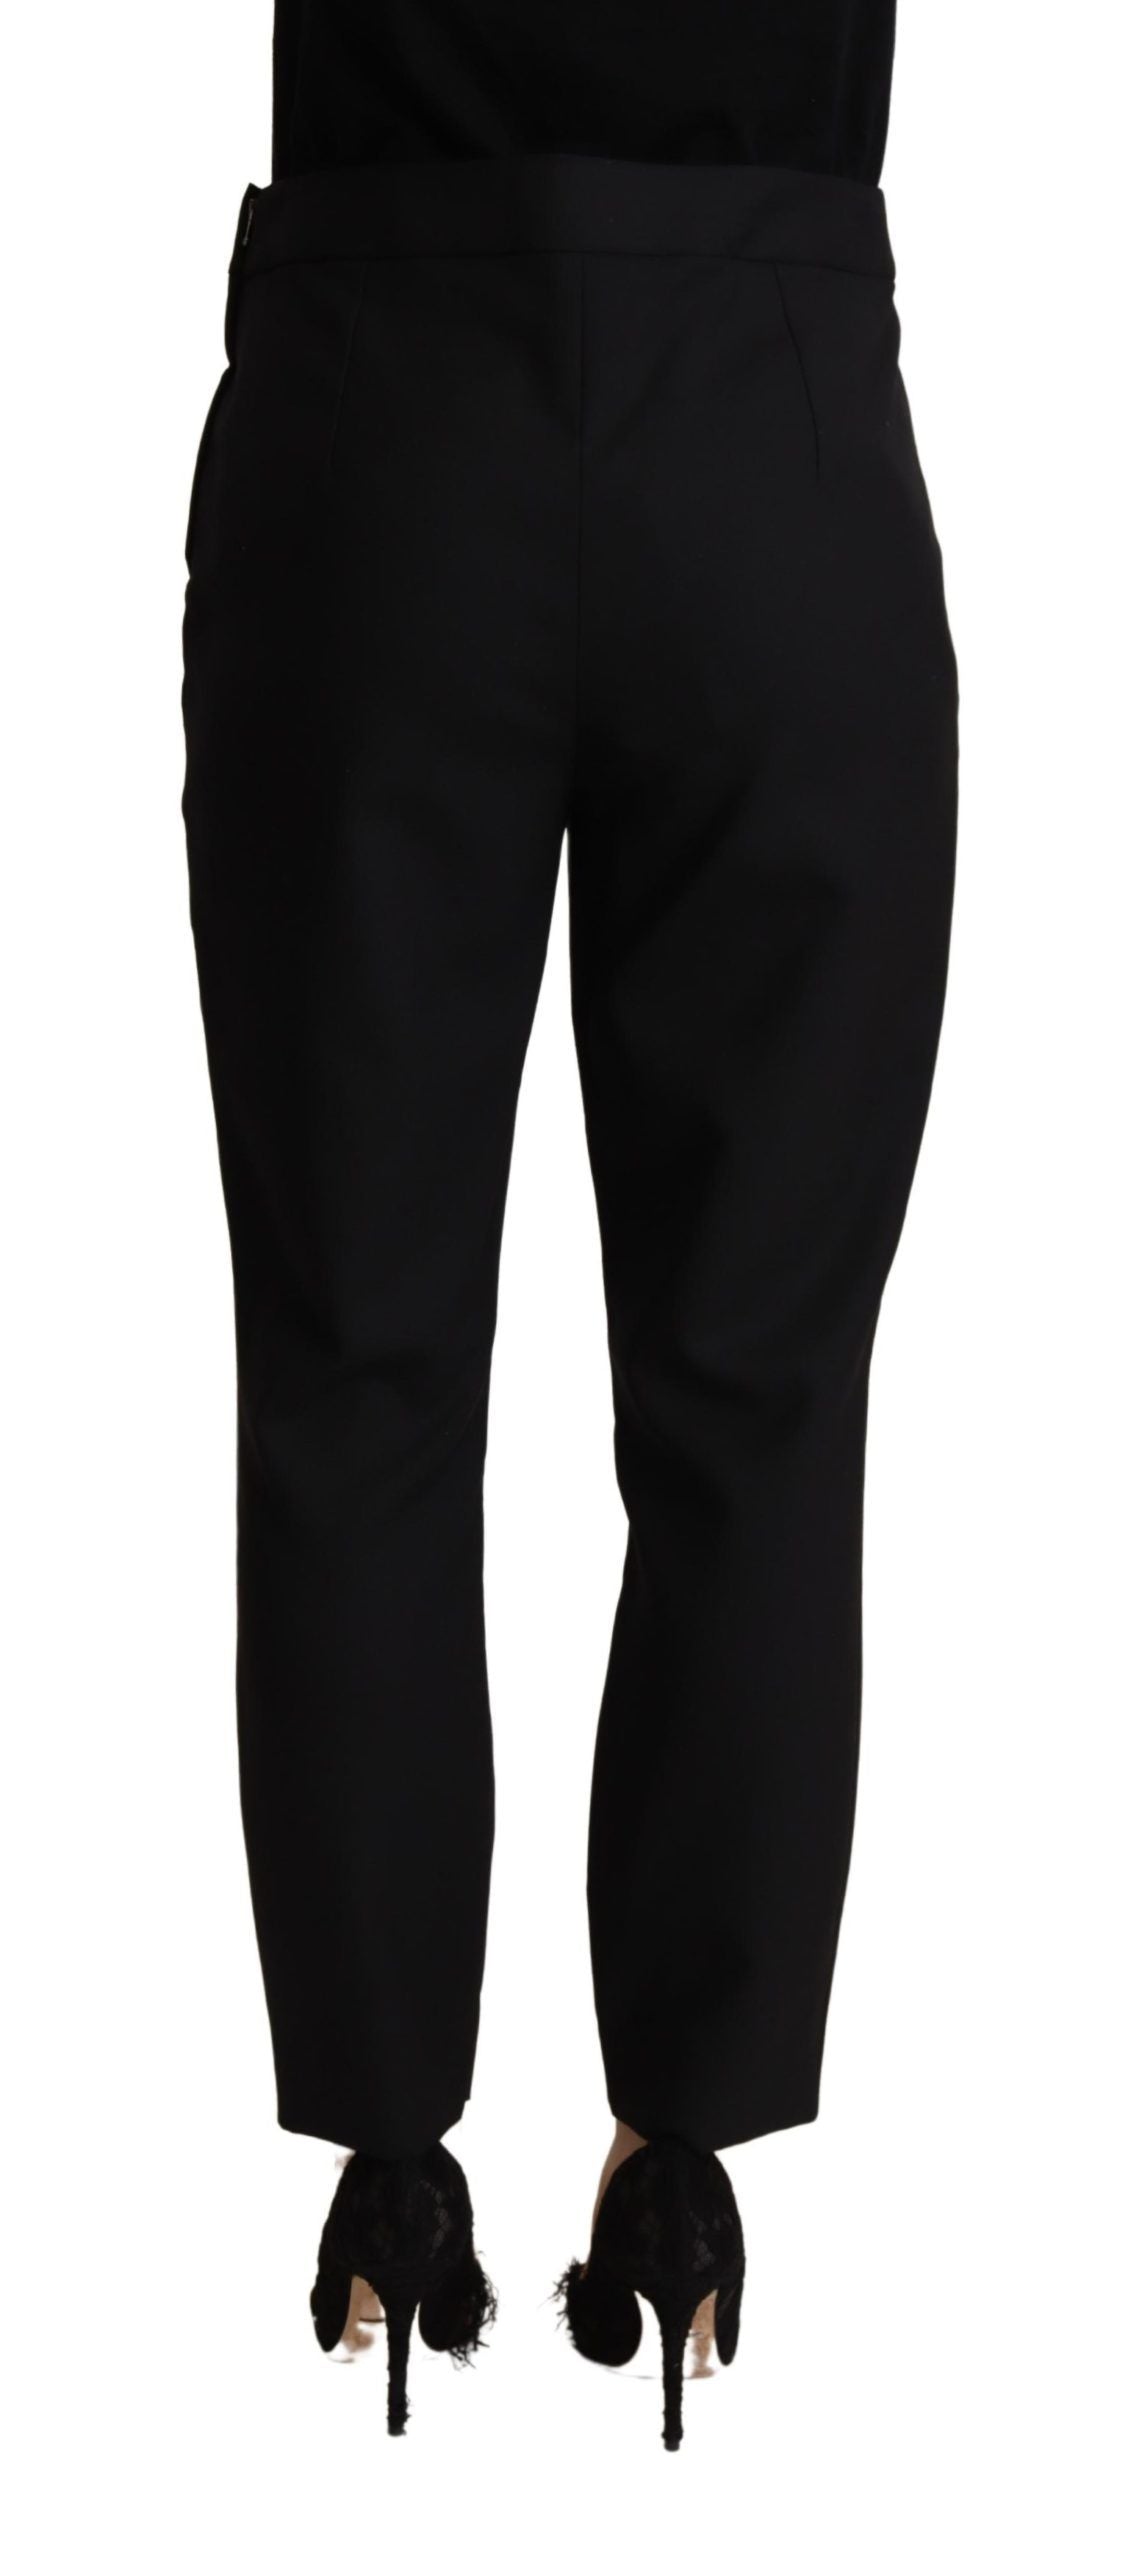 Elegant High Waisted Black Tapered Trousers